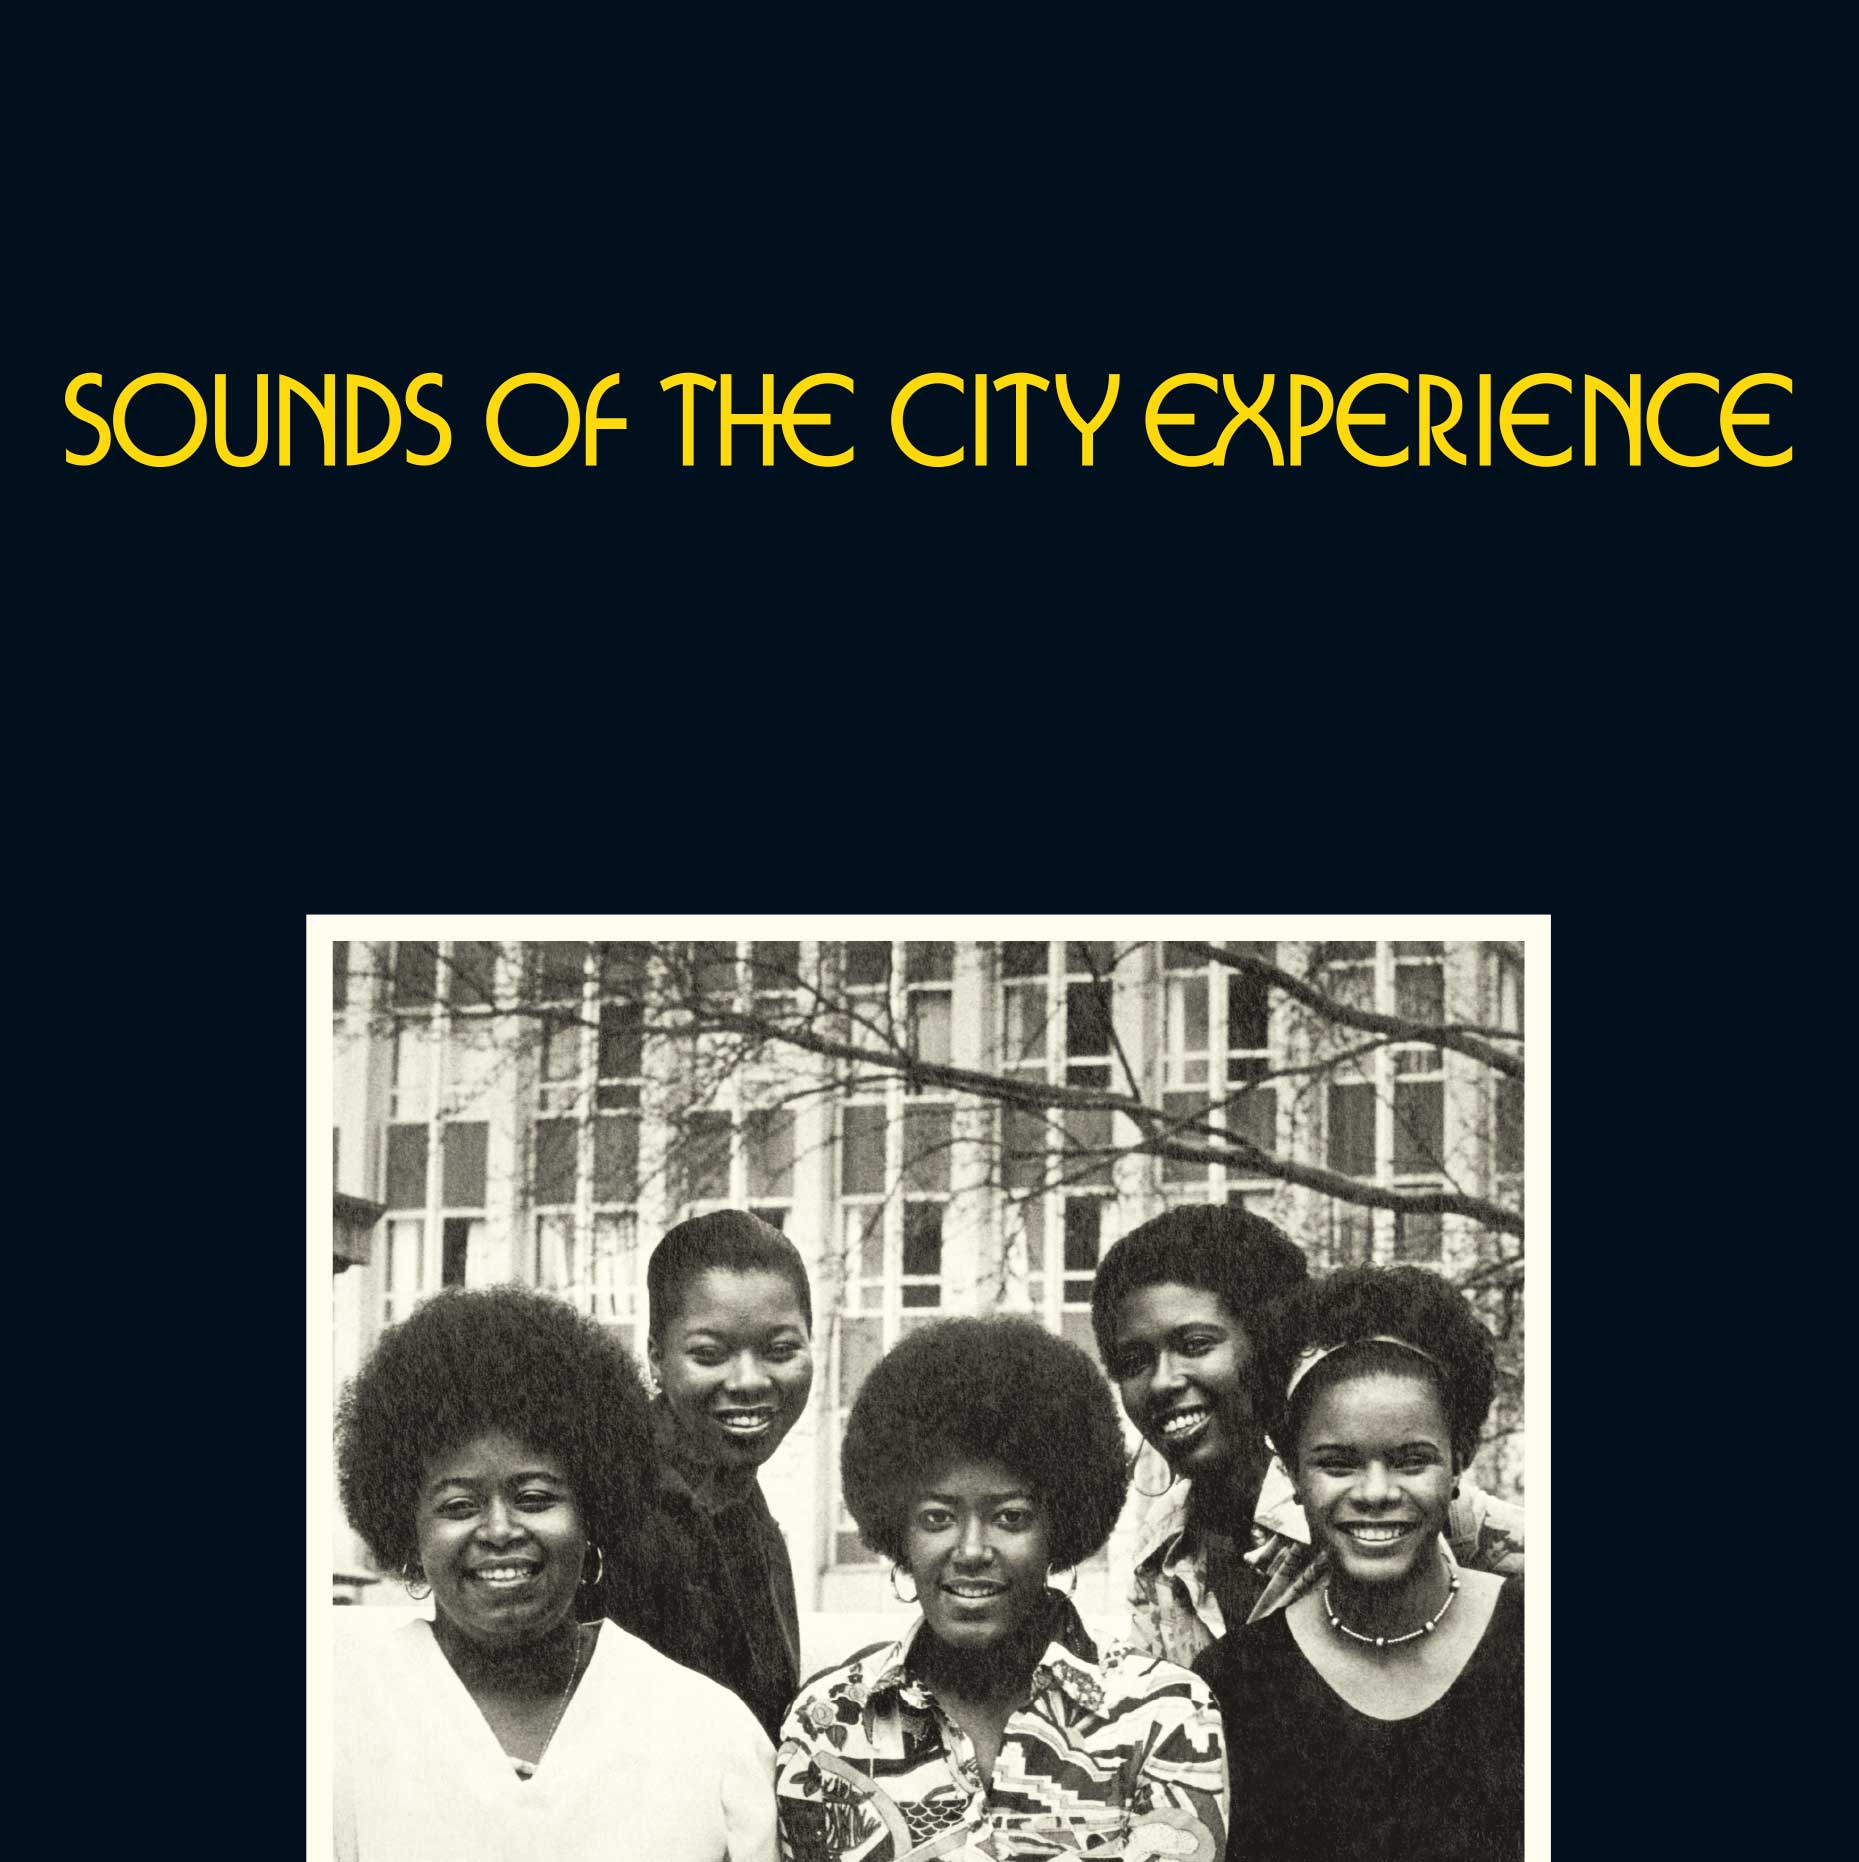 SOUNDS OF THE CITY EXPERIENCE「Sounds of the City Experience」